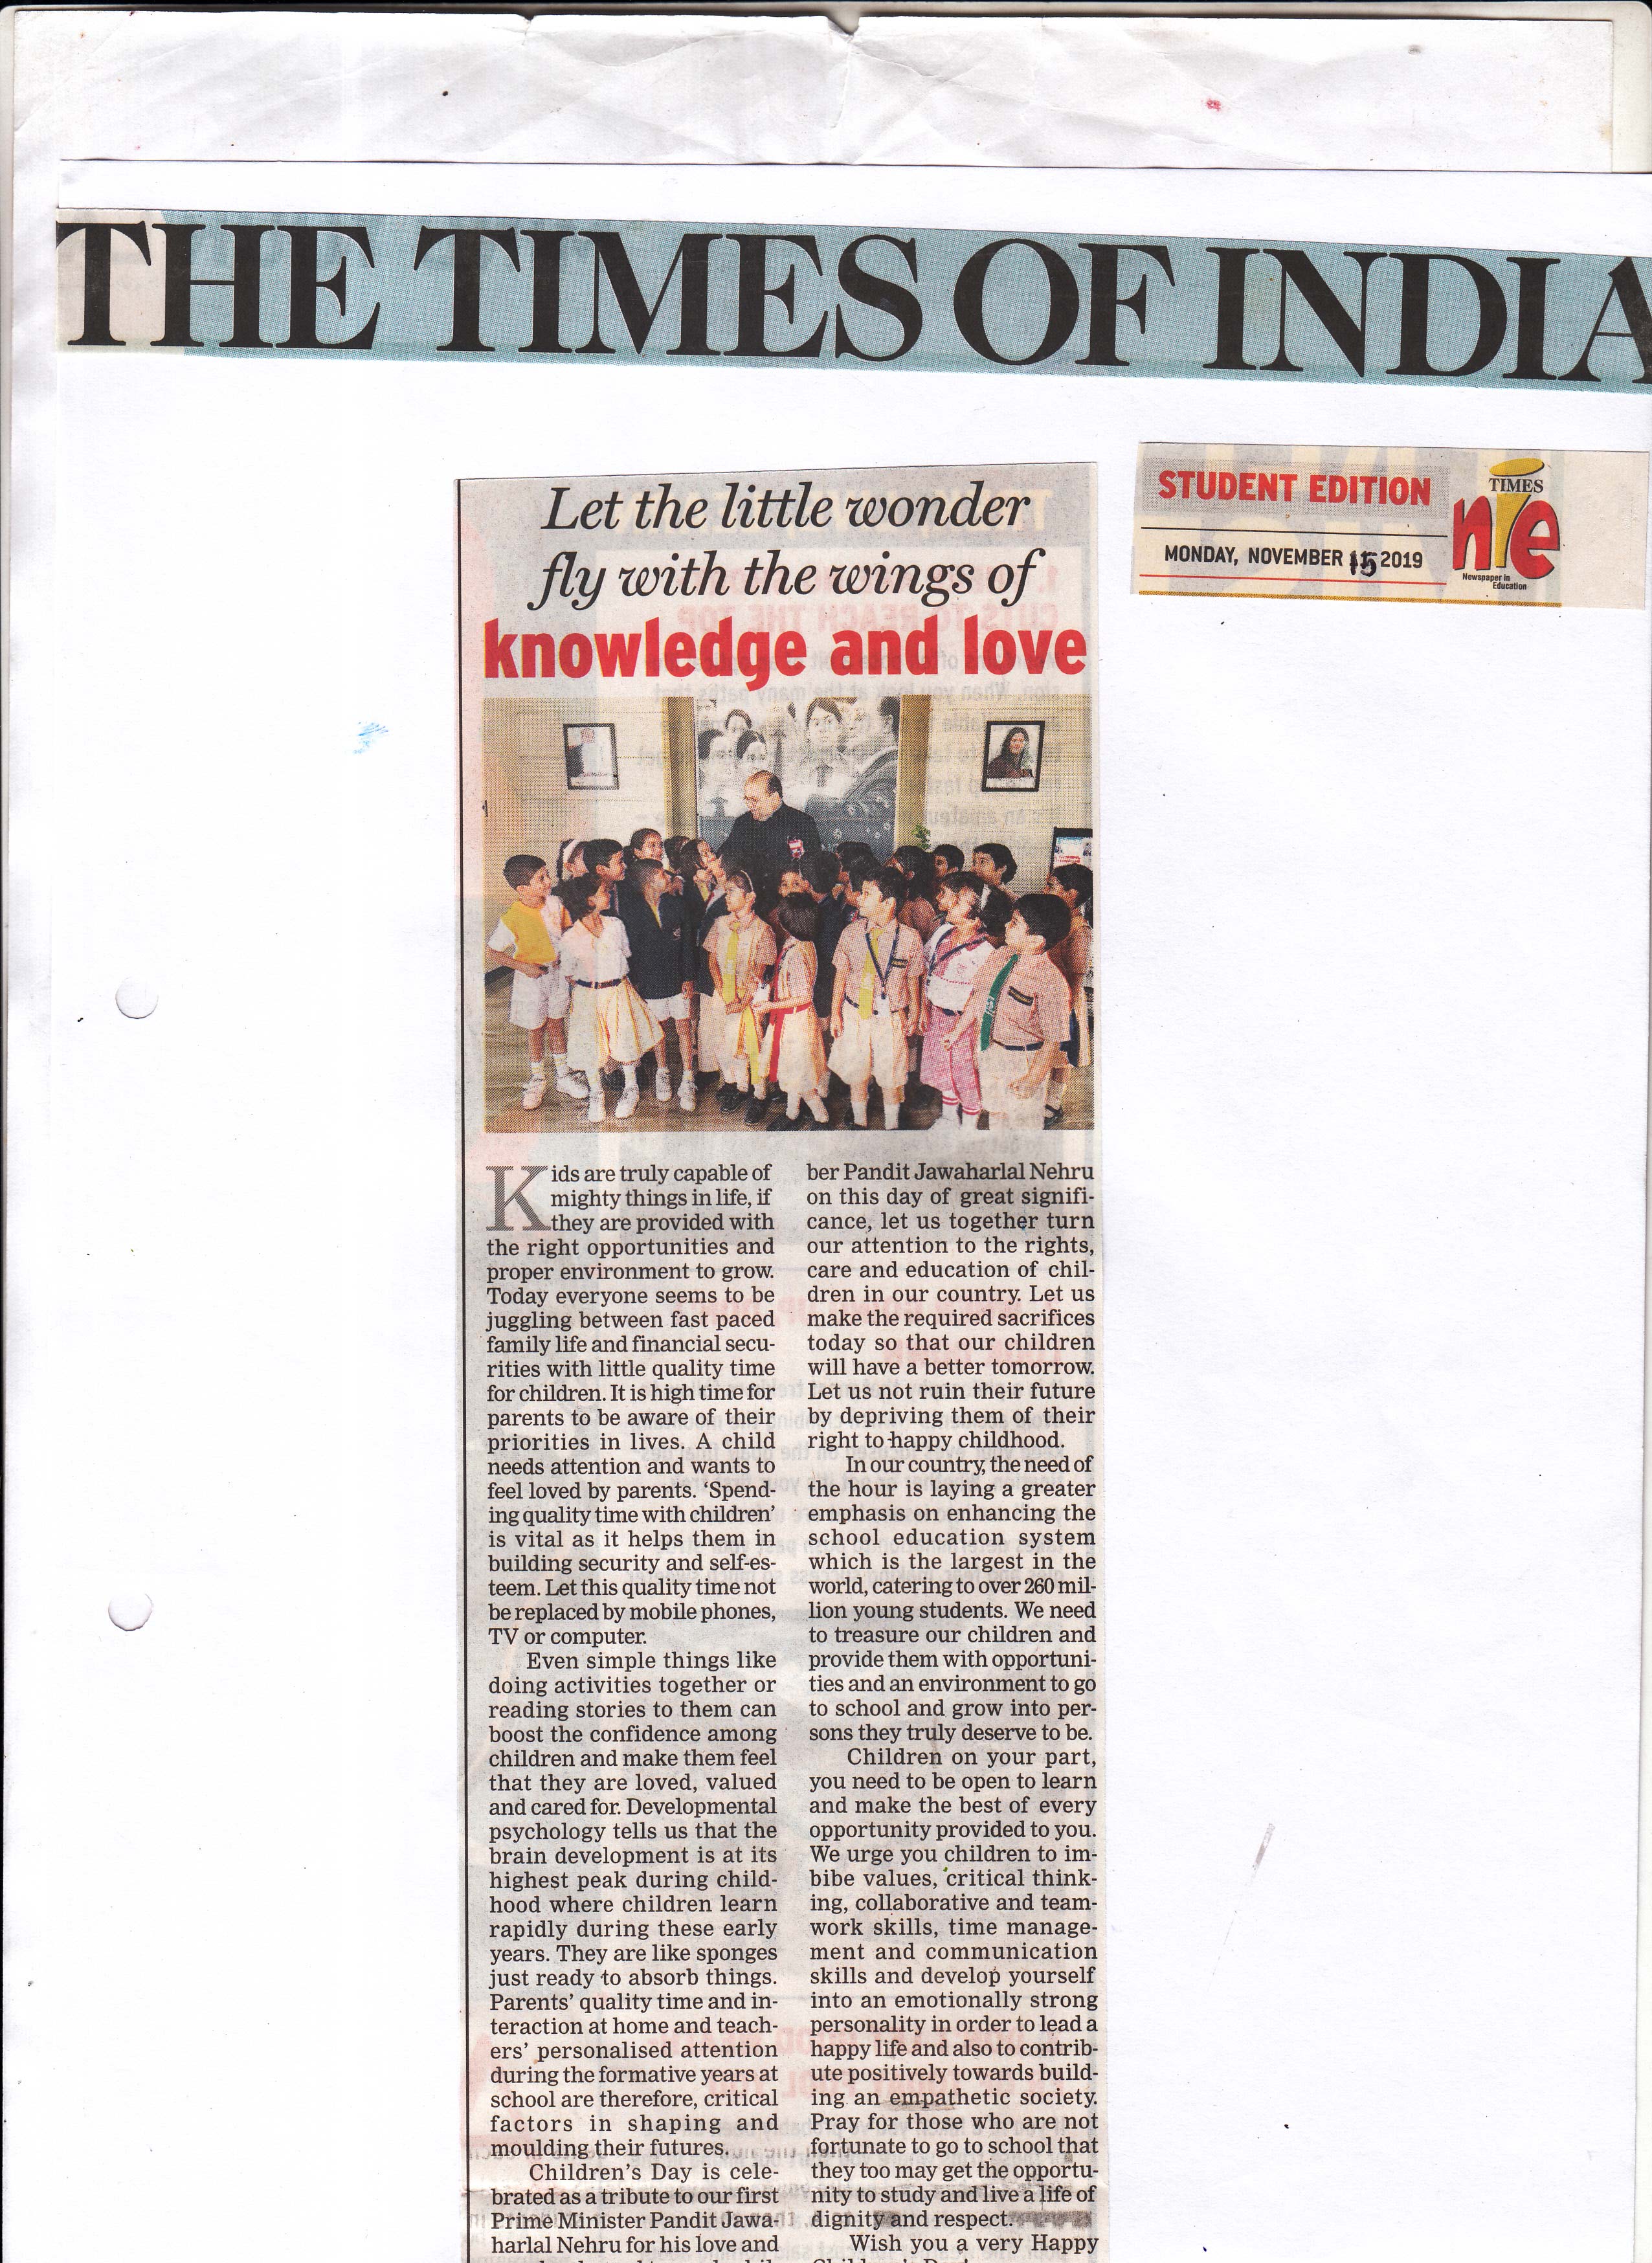 Children’s Day Celebration featured in Times of India